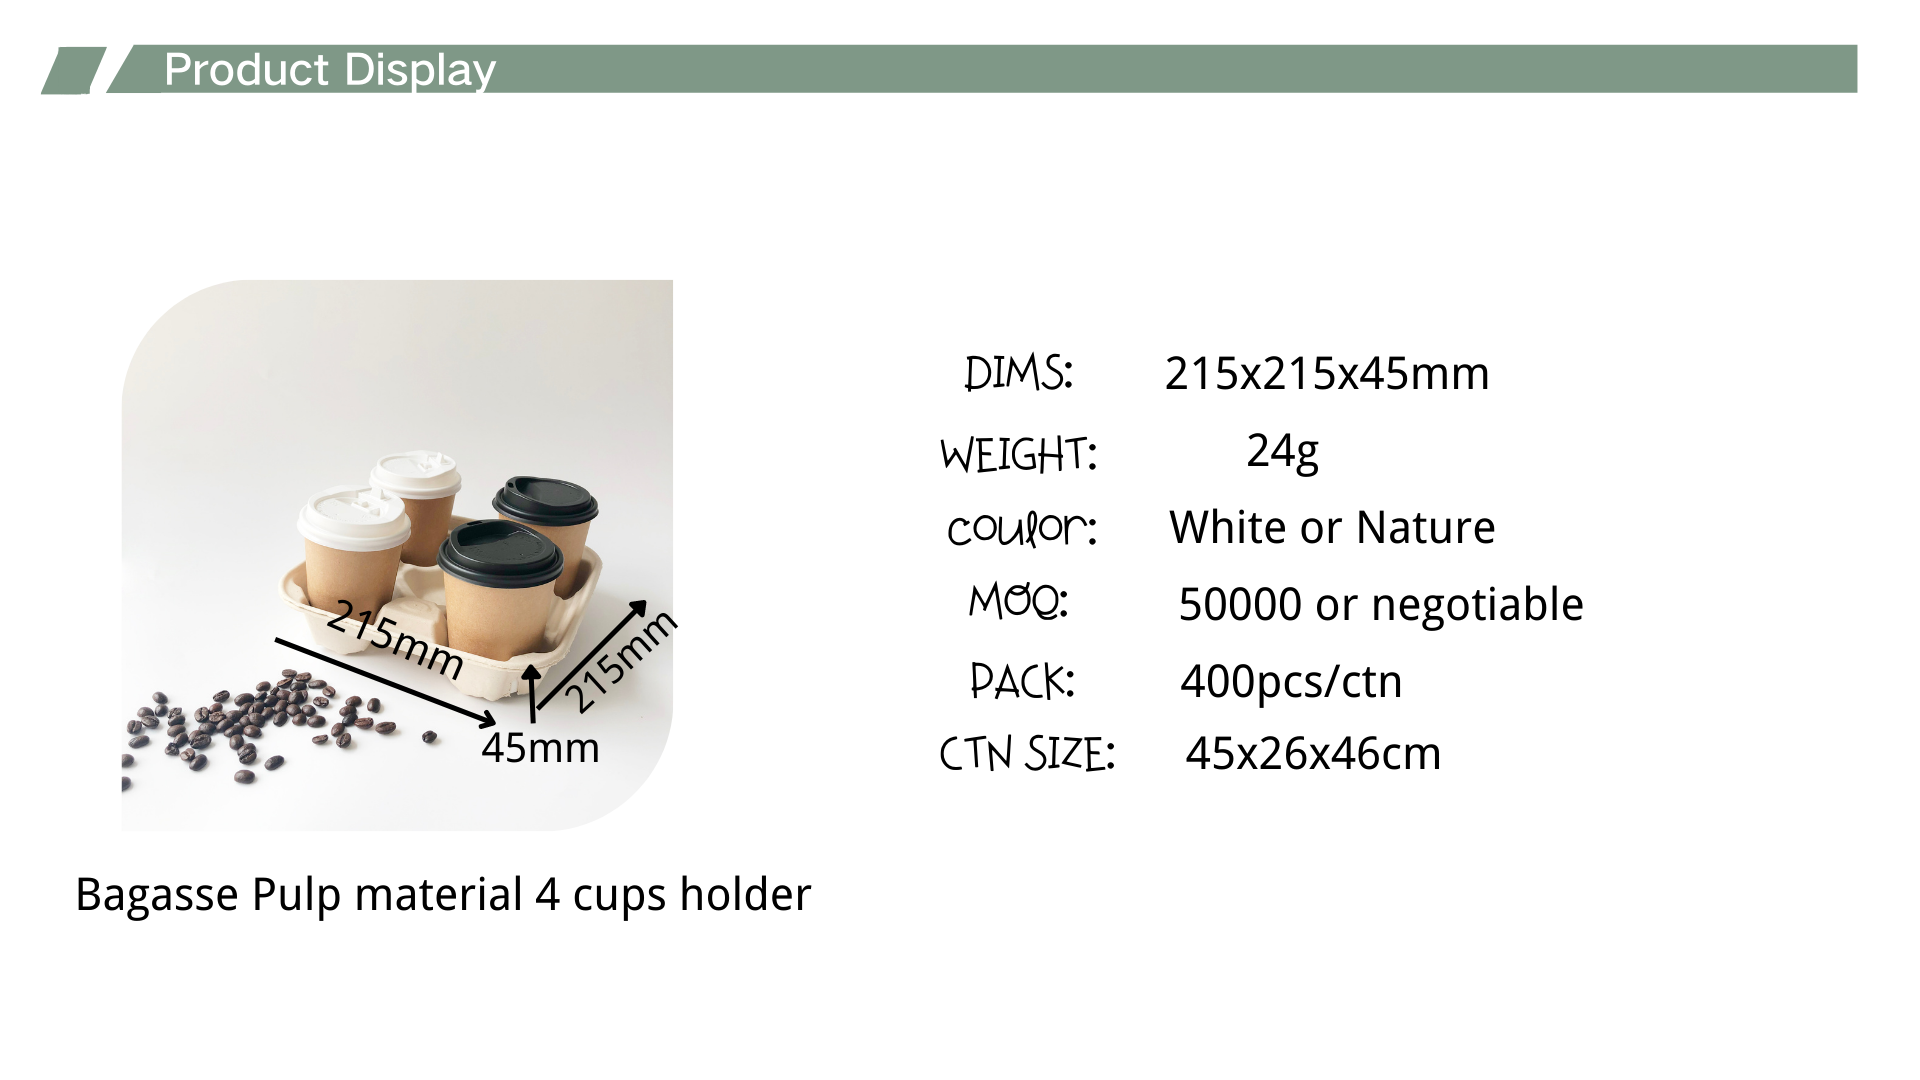 Bagasse Pulp material 4 cups holder